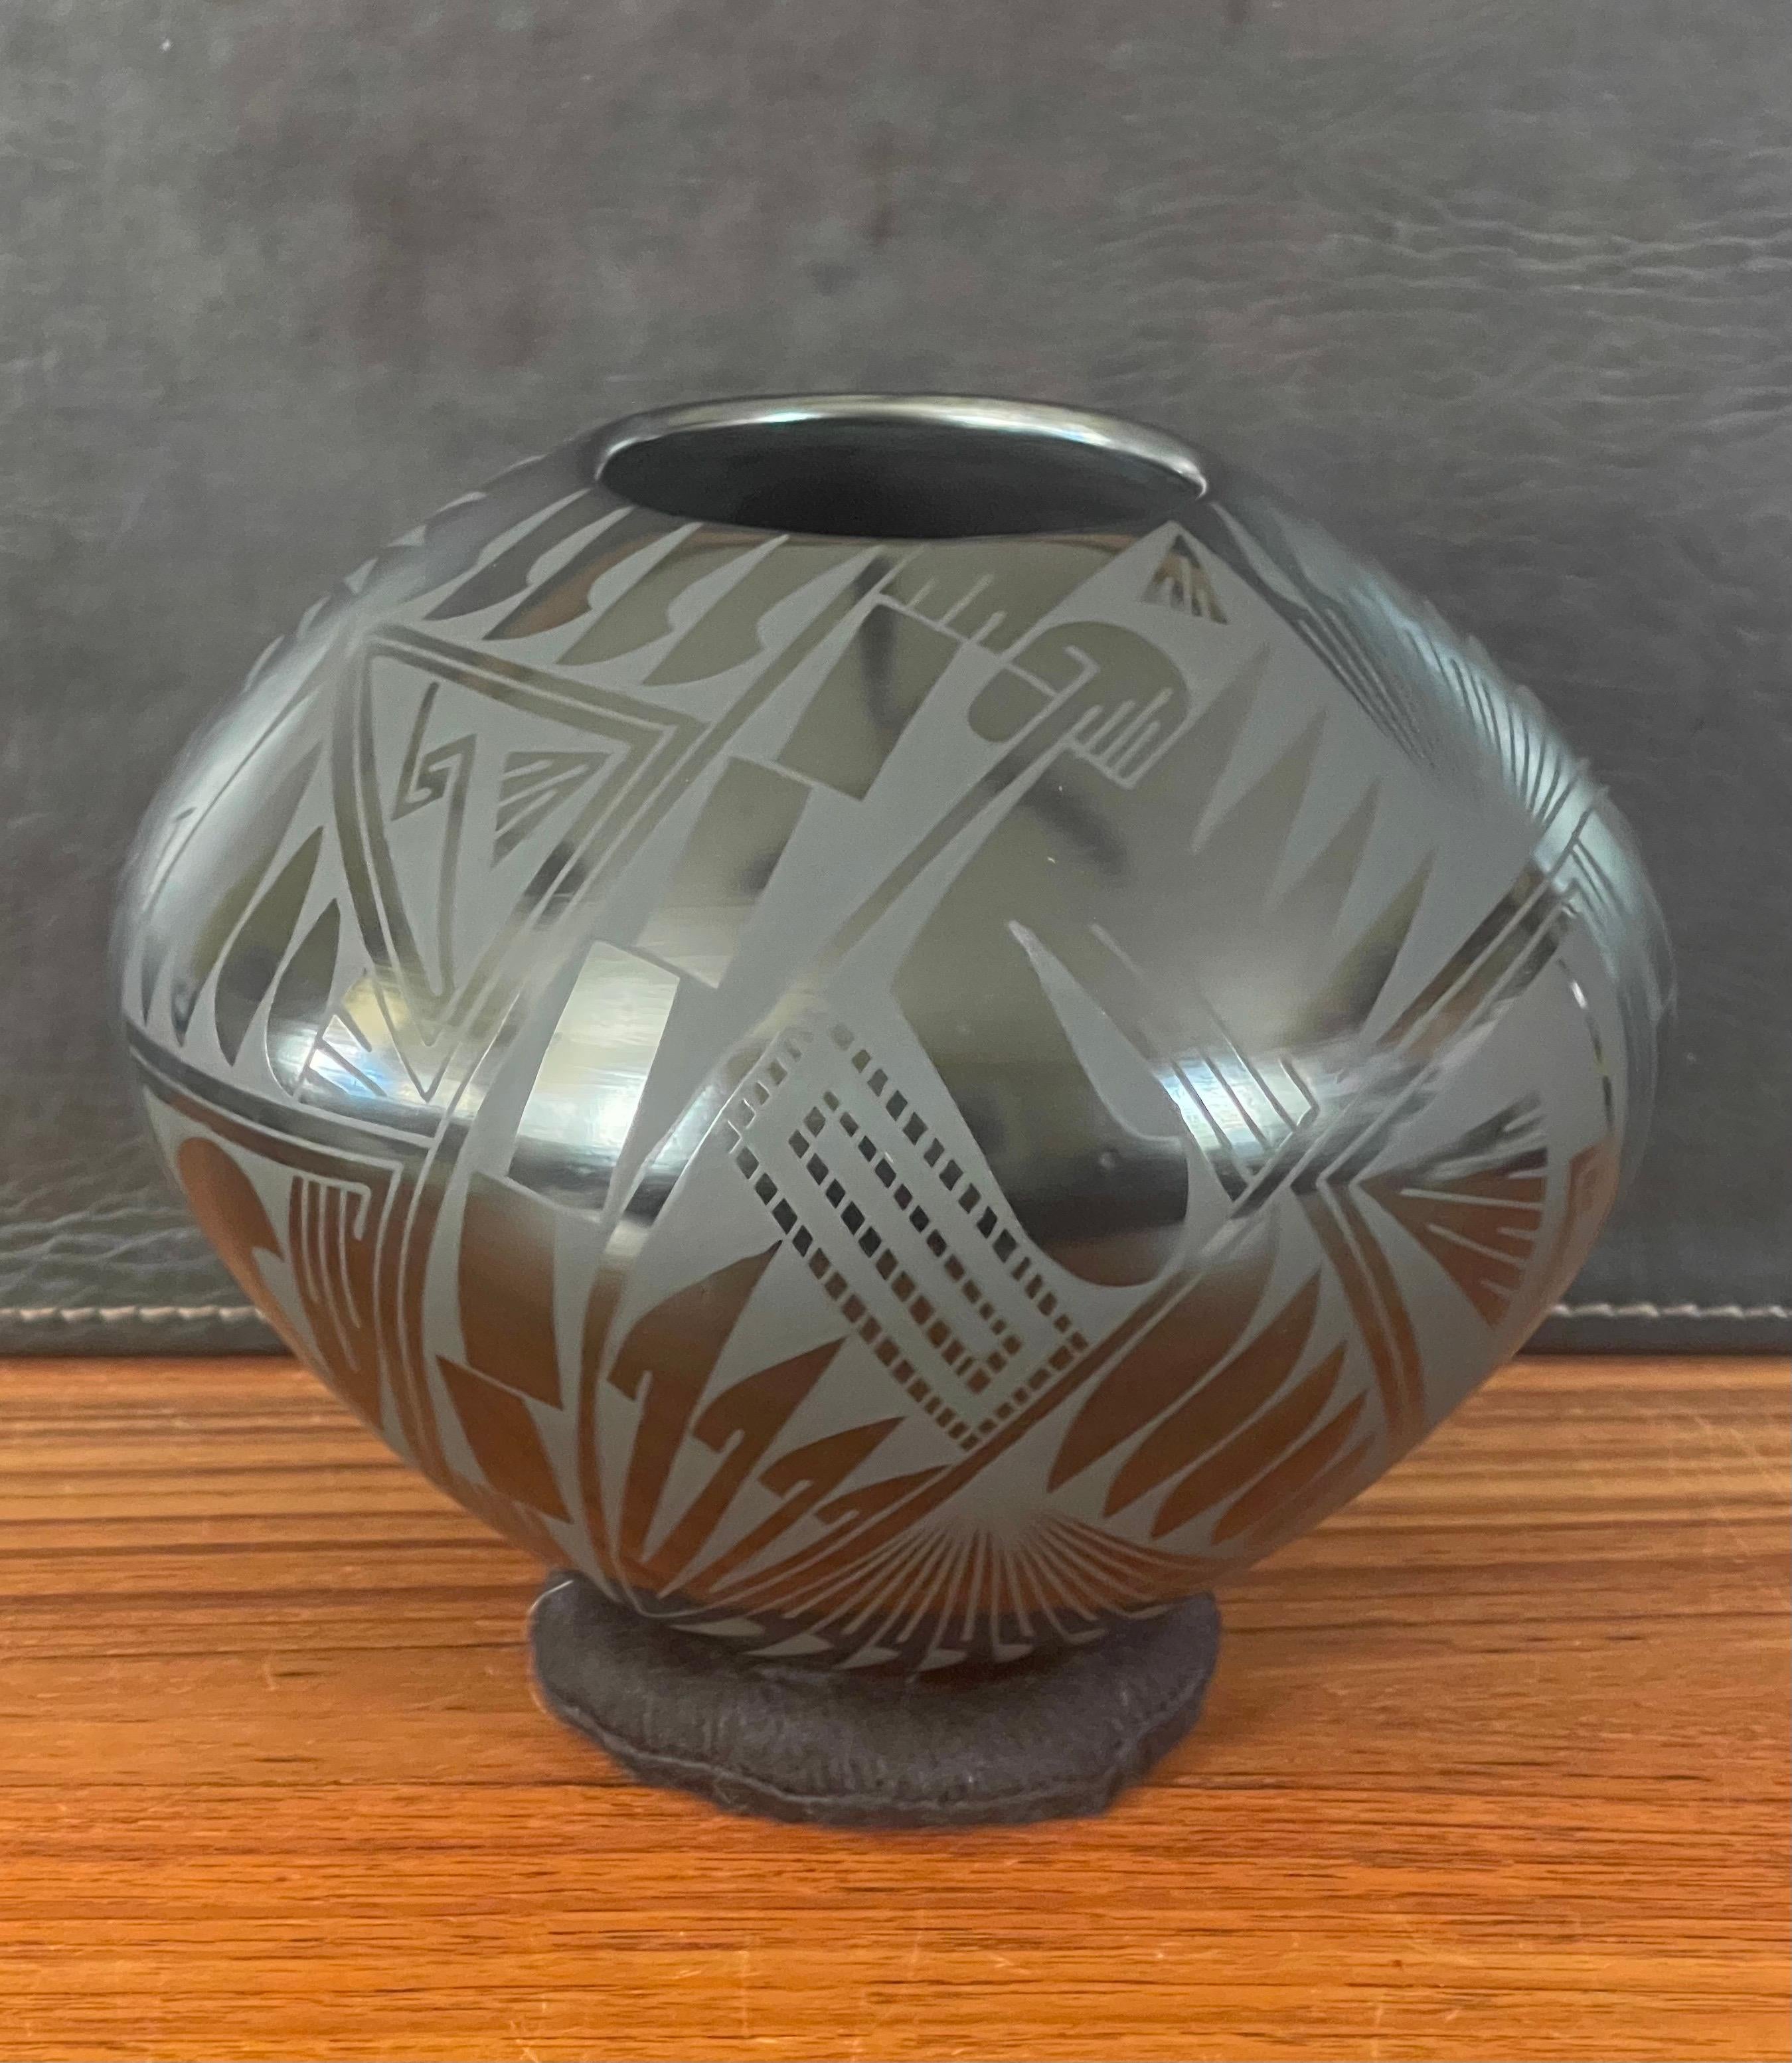 Beautiful hand-turned geometric blackware vase by Oscar Quezada, circa 1990s. The exquisite piece made of naturally black clay has a unique geometric design. This vase is in very good condition and measures 8